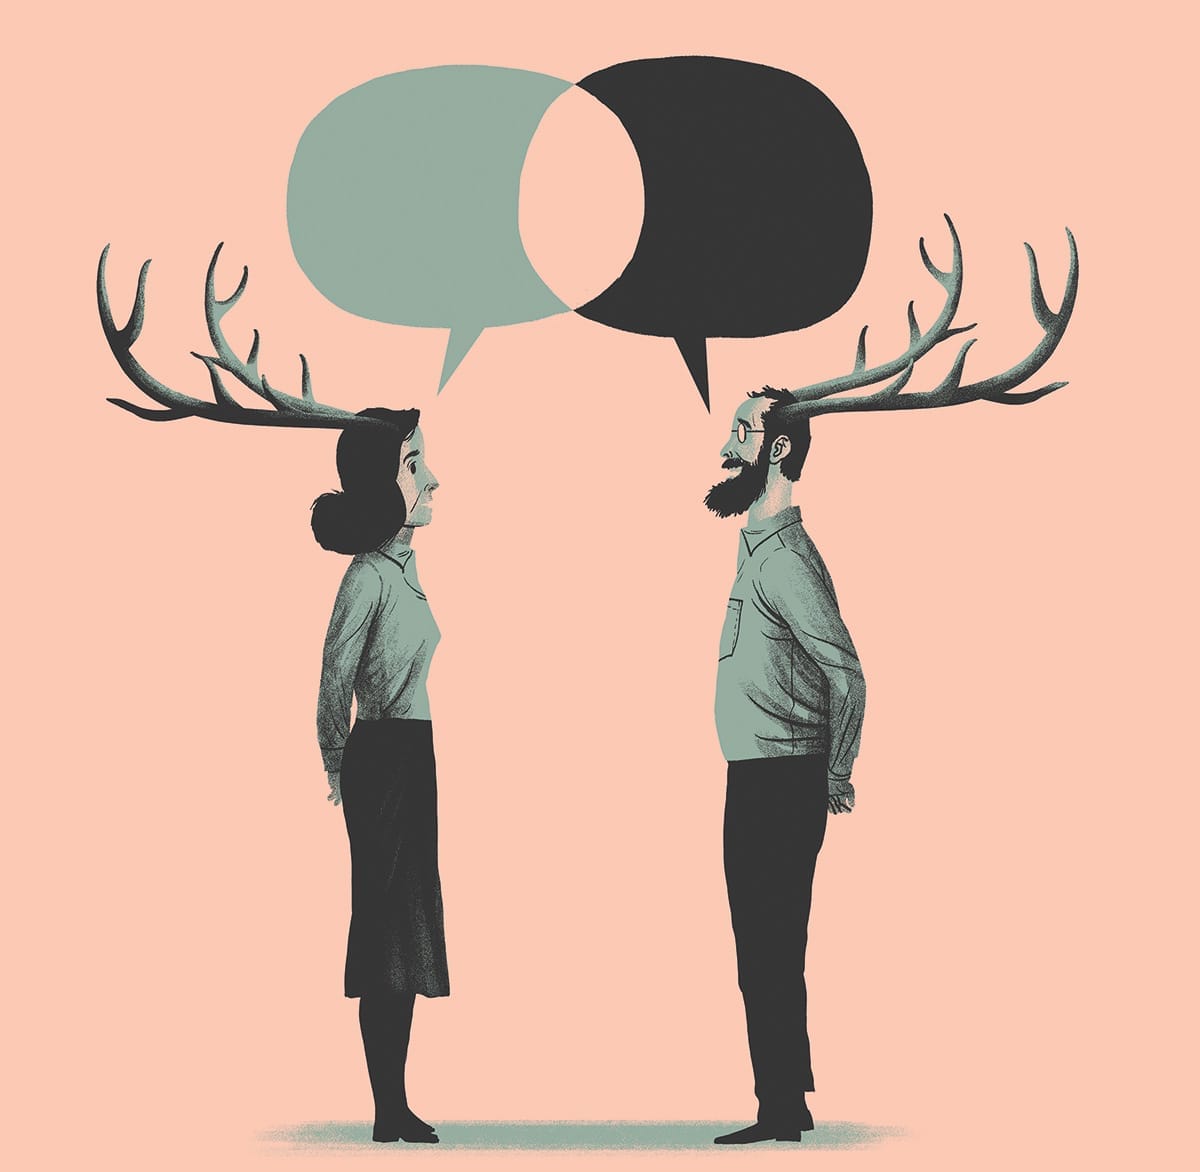 Decorative illustration of two businesspeople with antlers on their heads facing each other with speech bubbles over their heads.